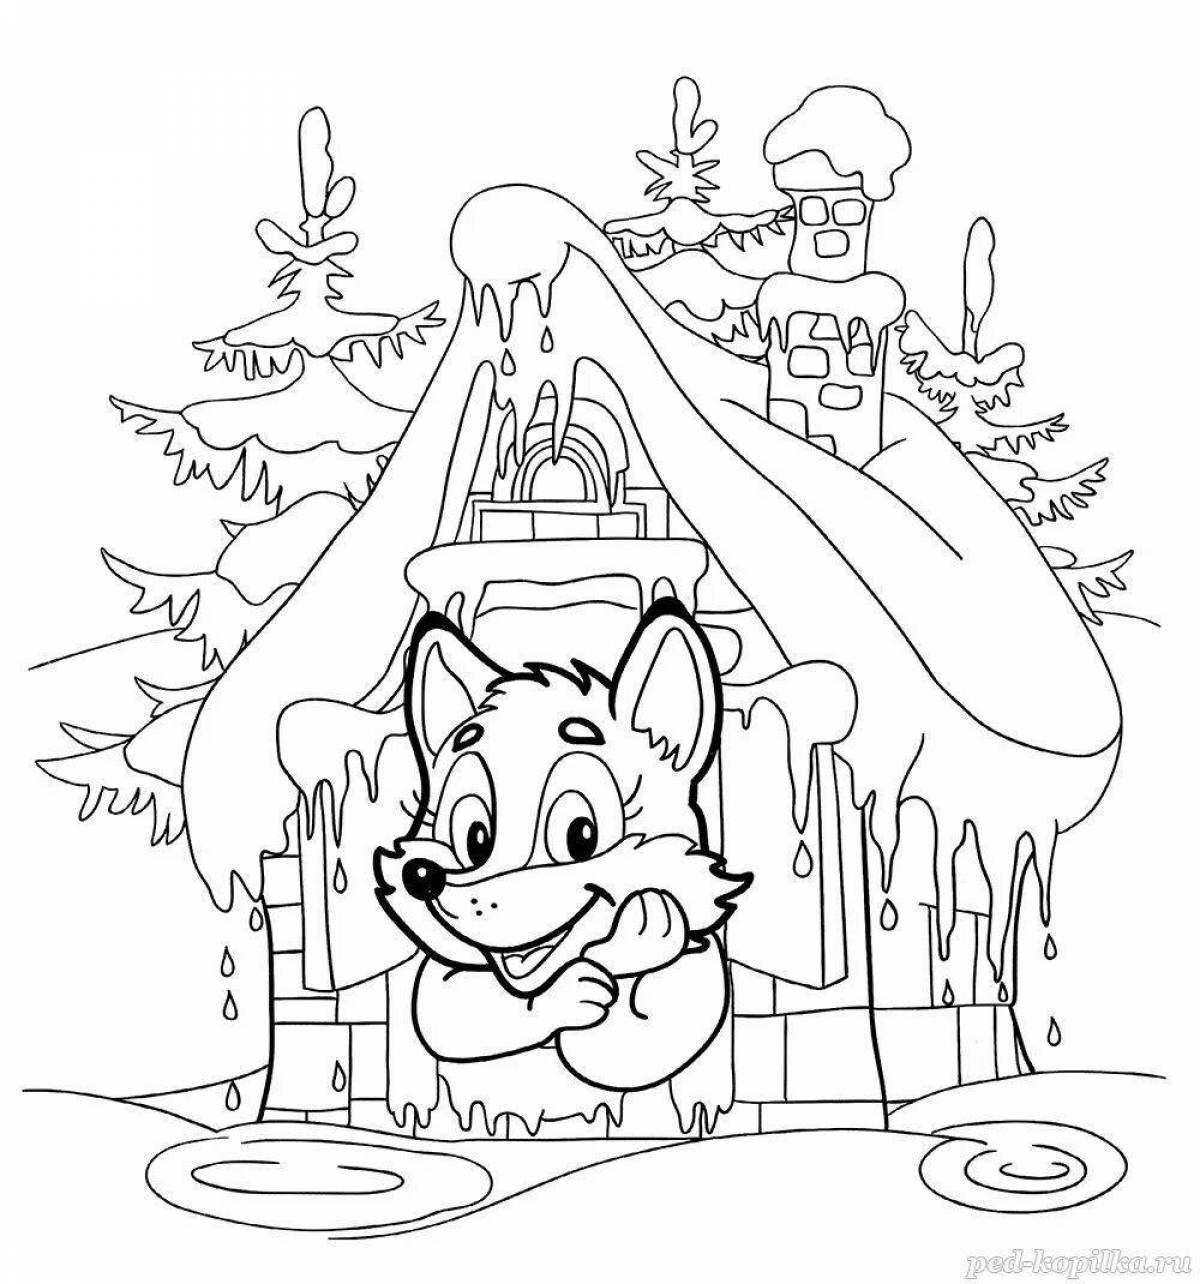 Live coloring fairy tale fox and hare